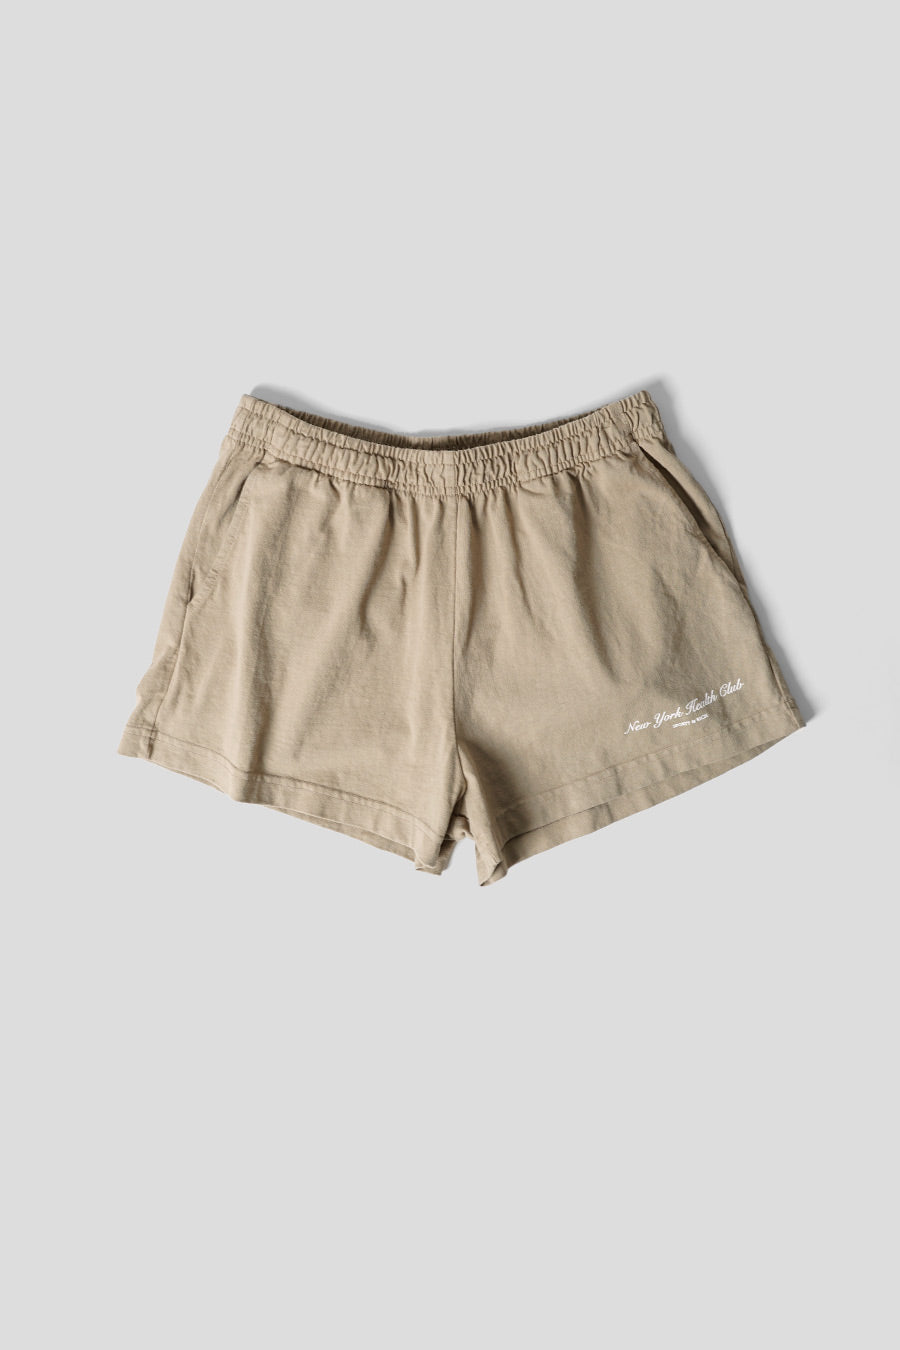 Sporty & Rich - SHORT NY HEALTH CLUB BEIGE - LE LABO STORE